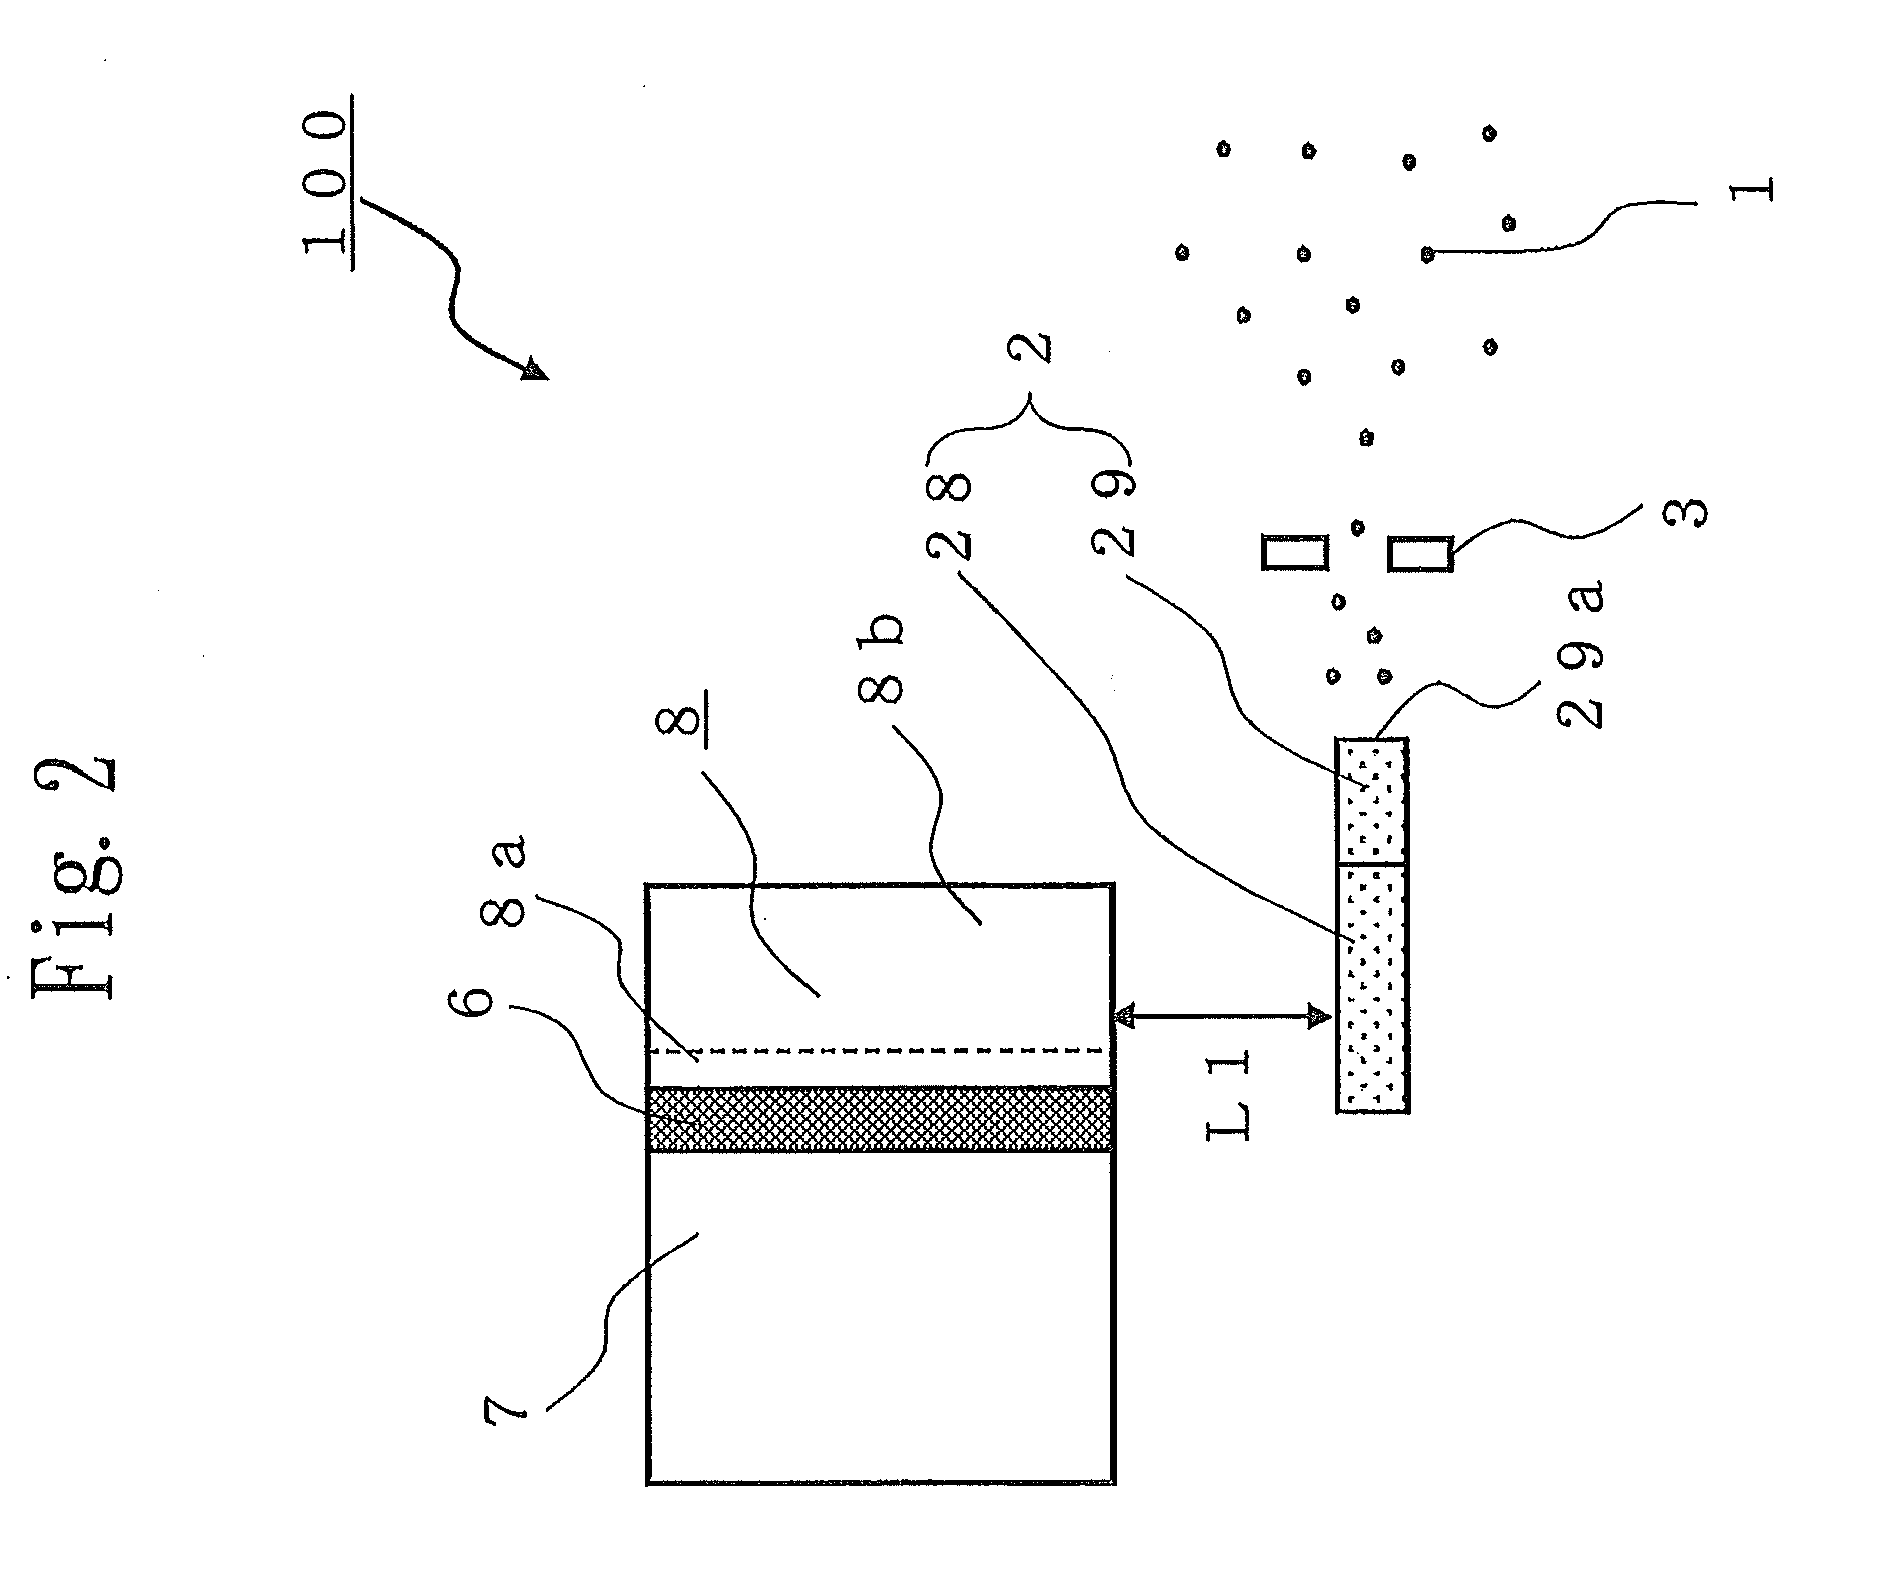 Electrostatic atomizer and air conditioner